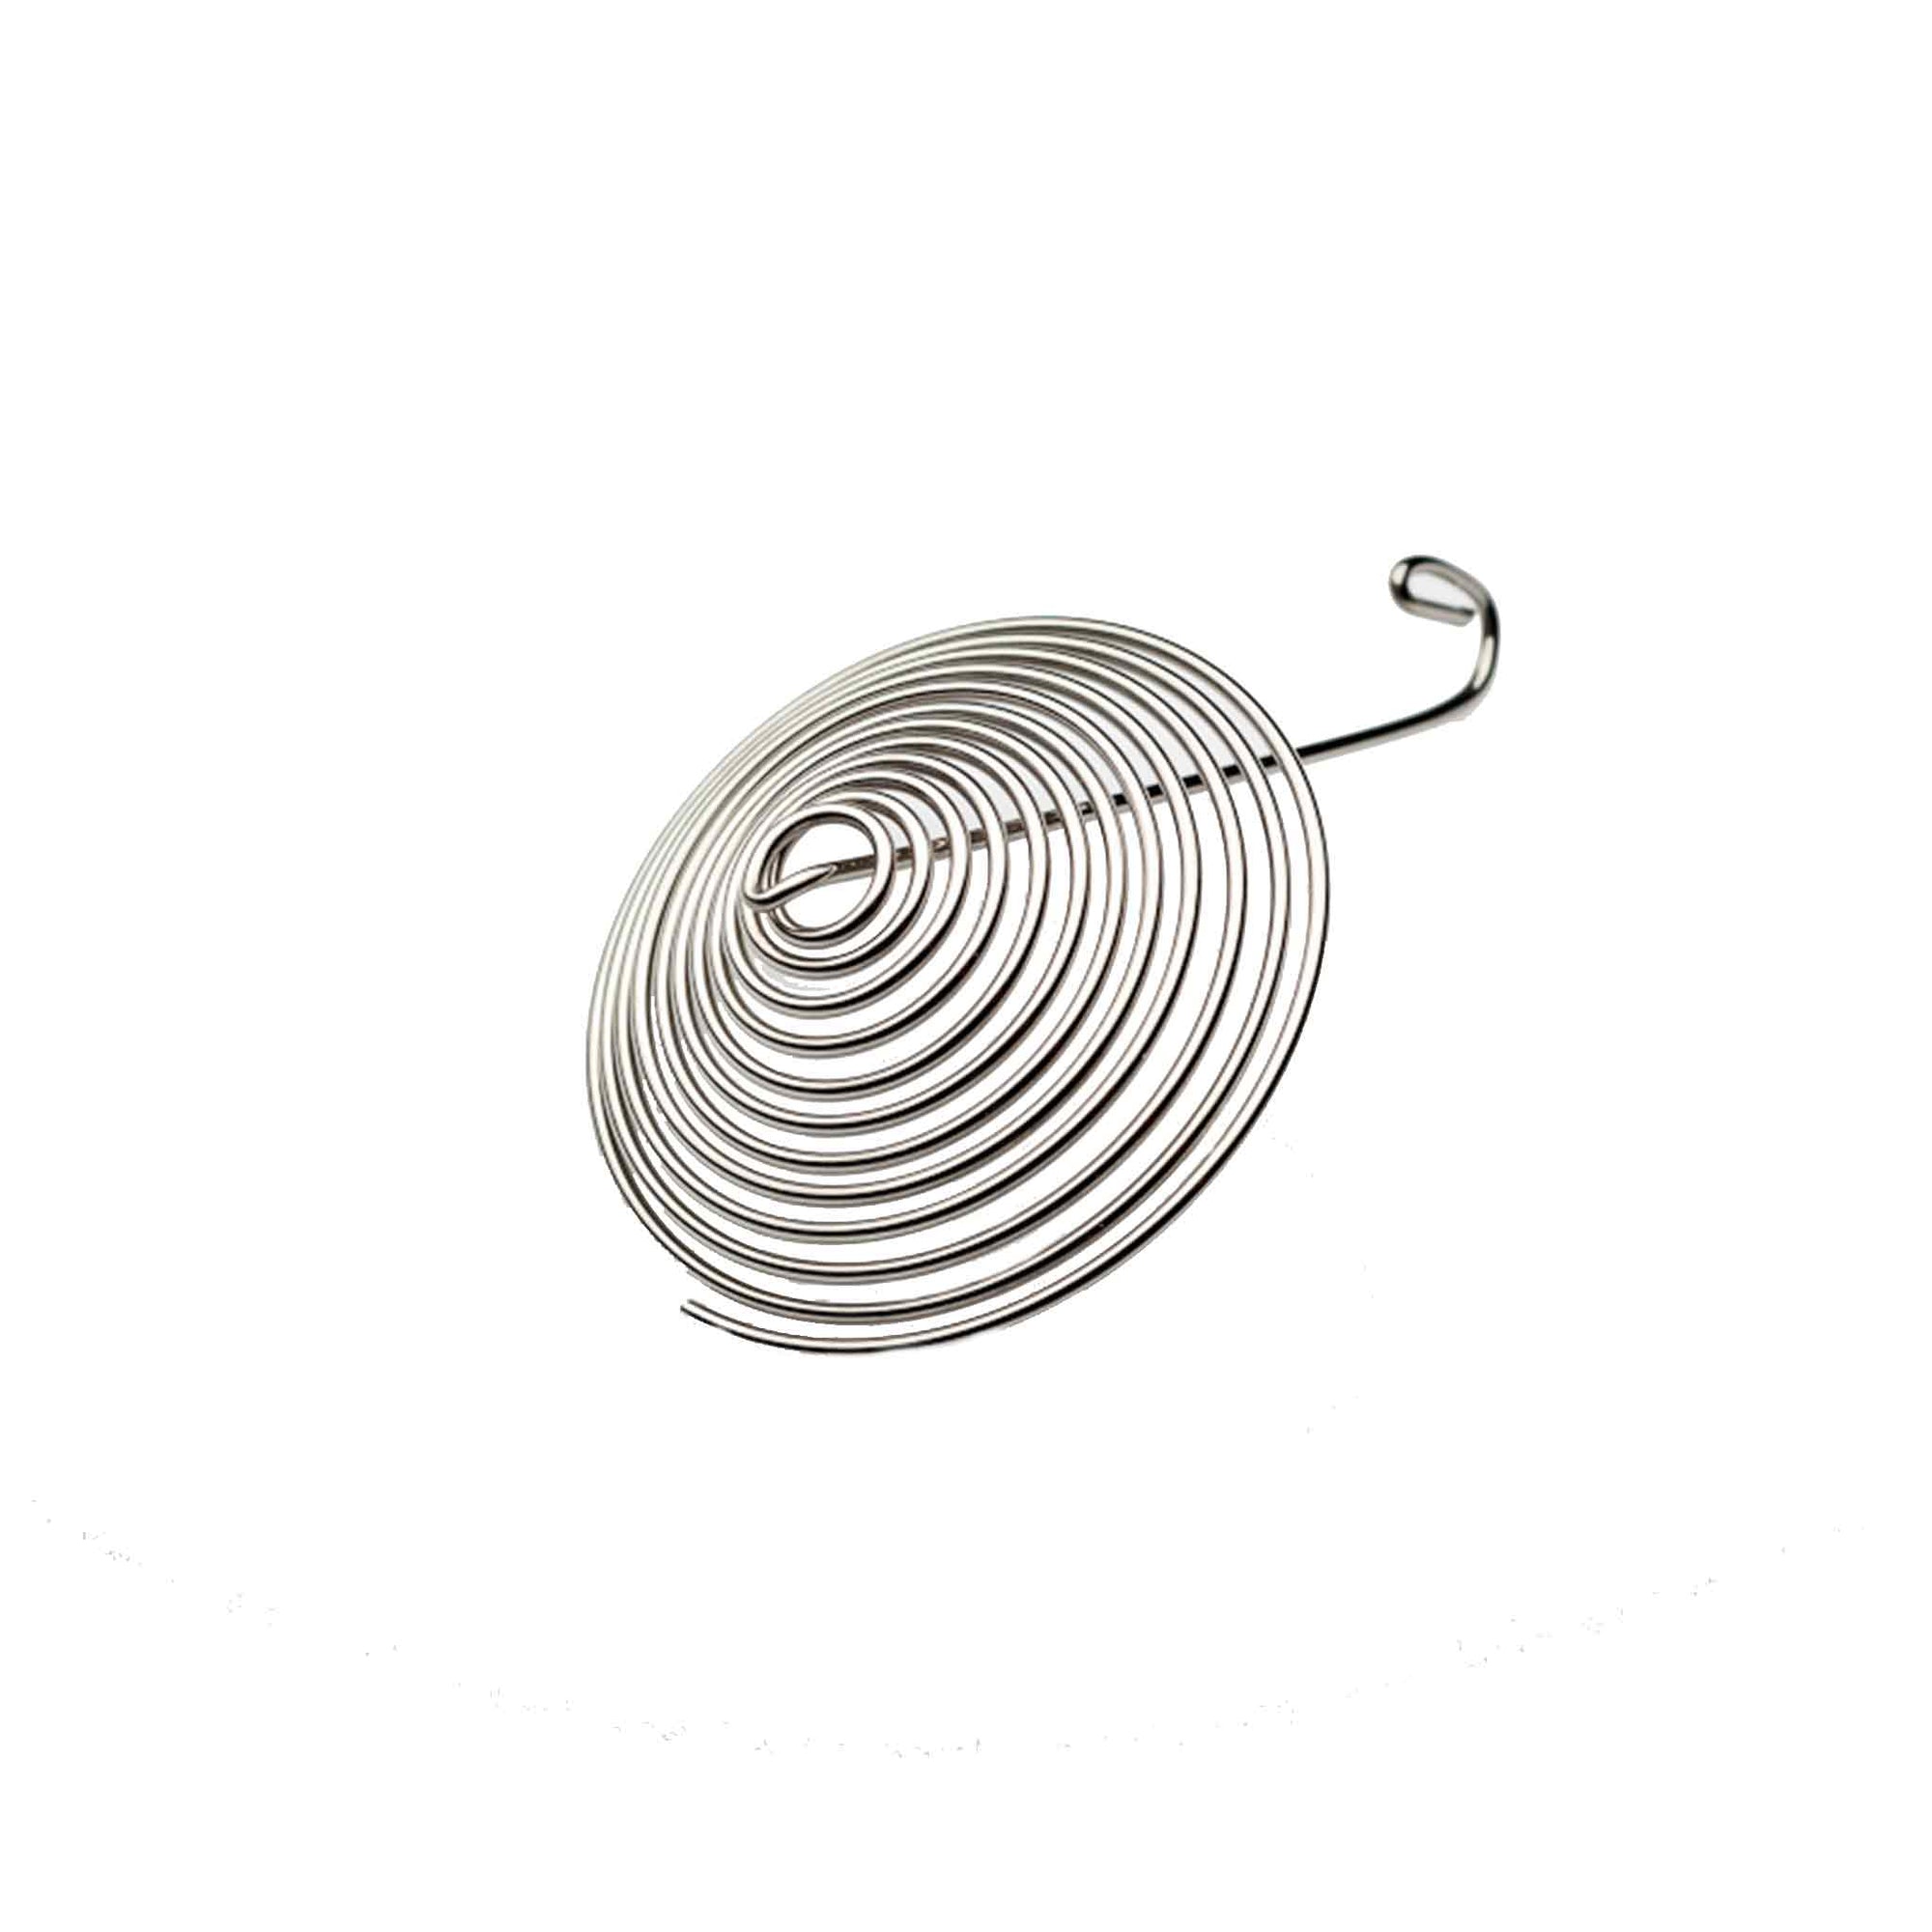 Teaposy charme teapot filter, stainless steel